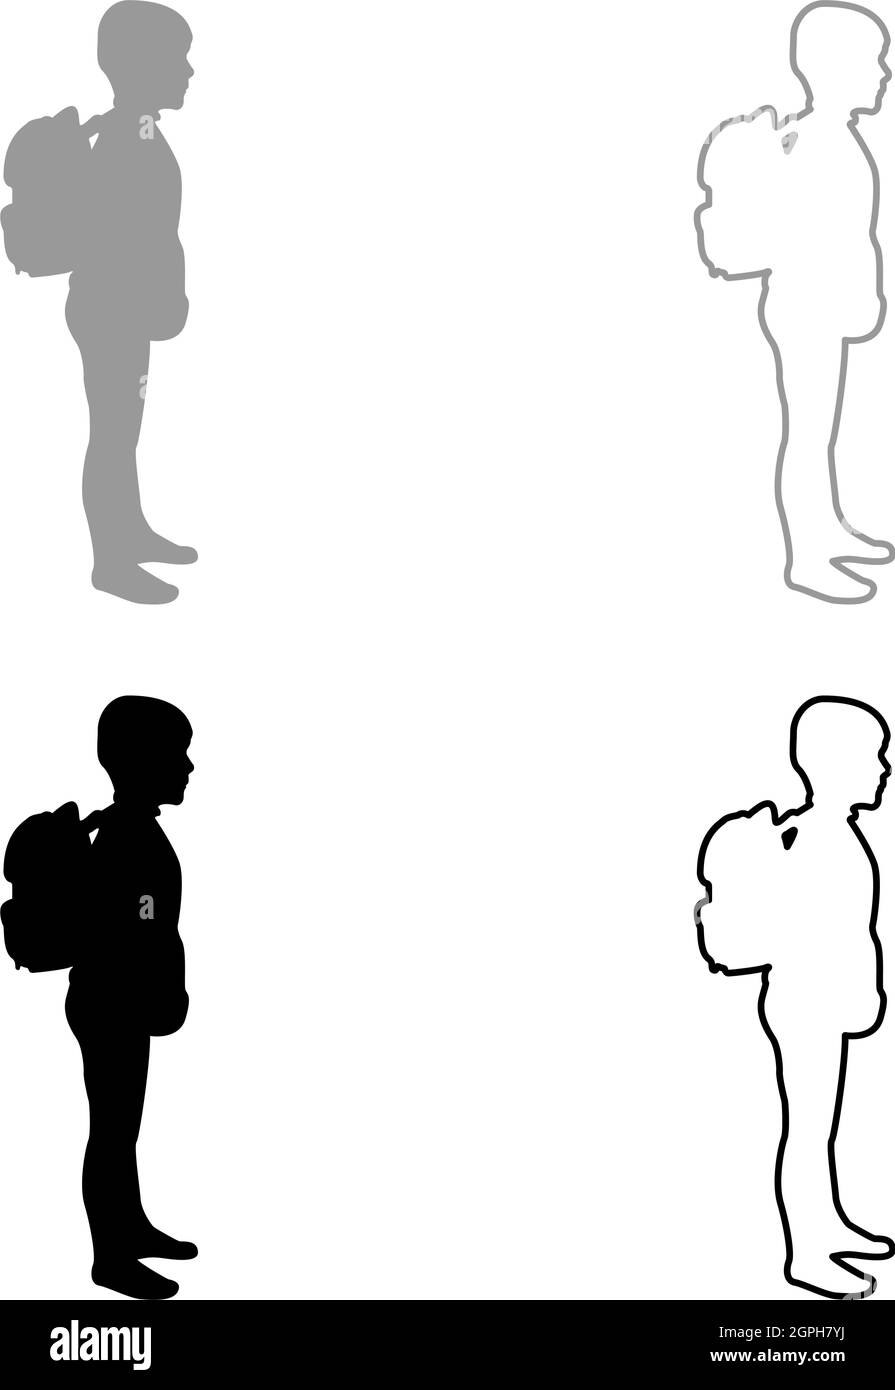 Schoolboy with backpack Pupil stand carrying on back Going to school concept Come back to school idea education Preschooler rucksack first September start lessons knapsack Side view silhouette grey black color vector illustration solid outline style image Stock Vector